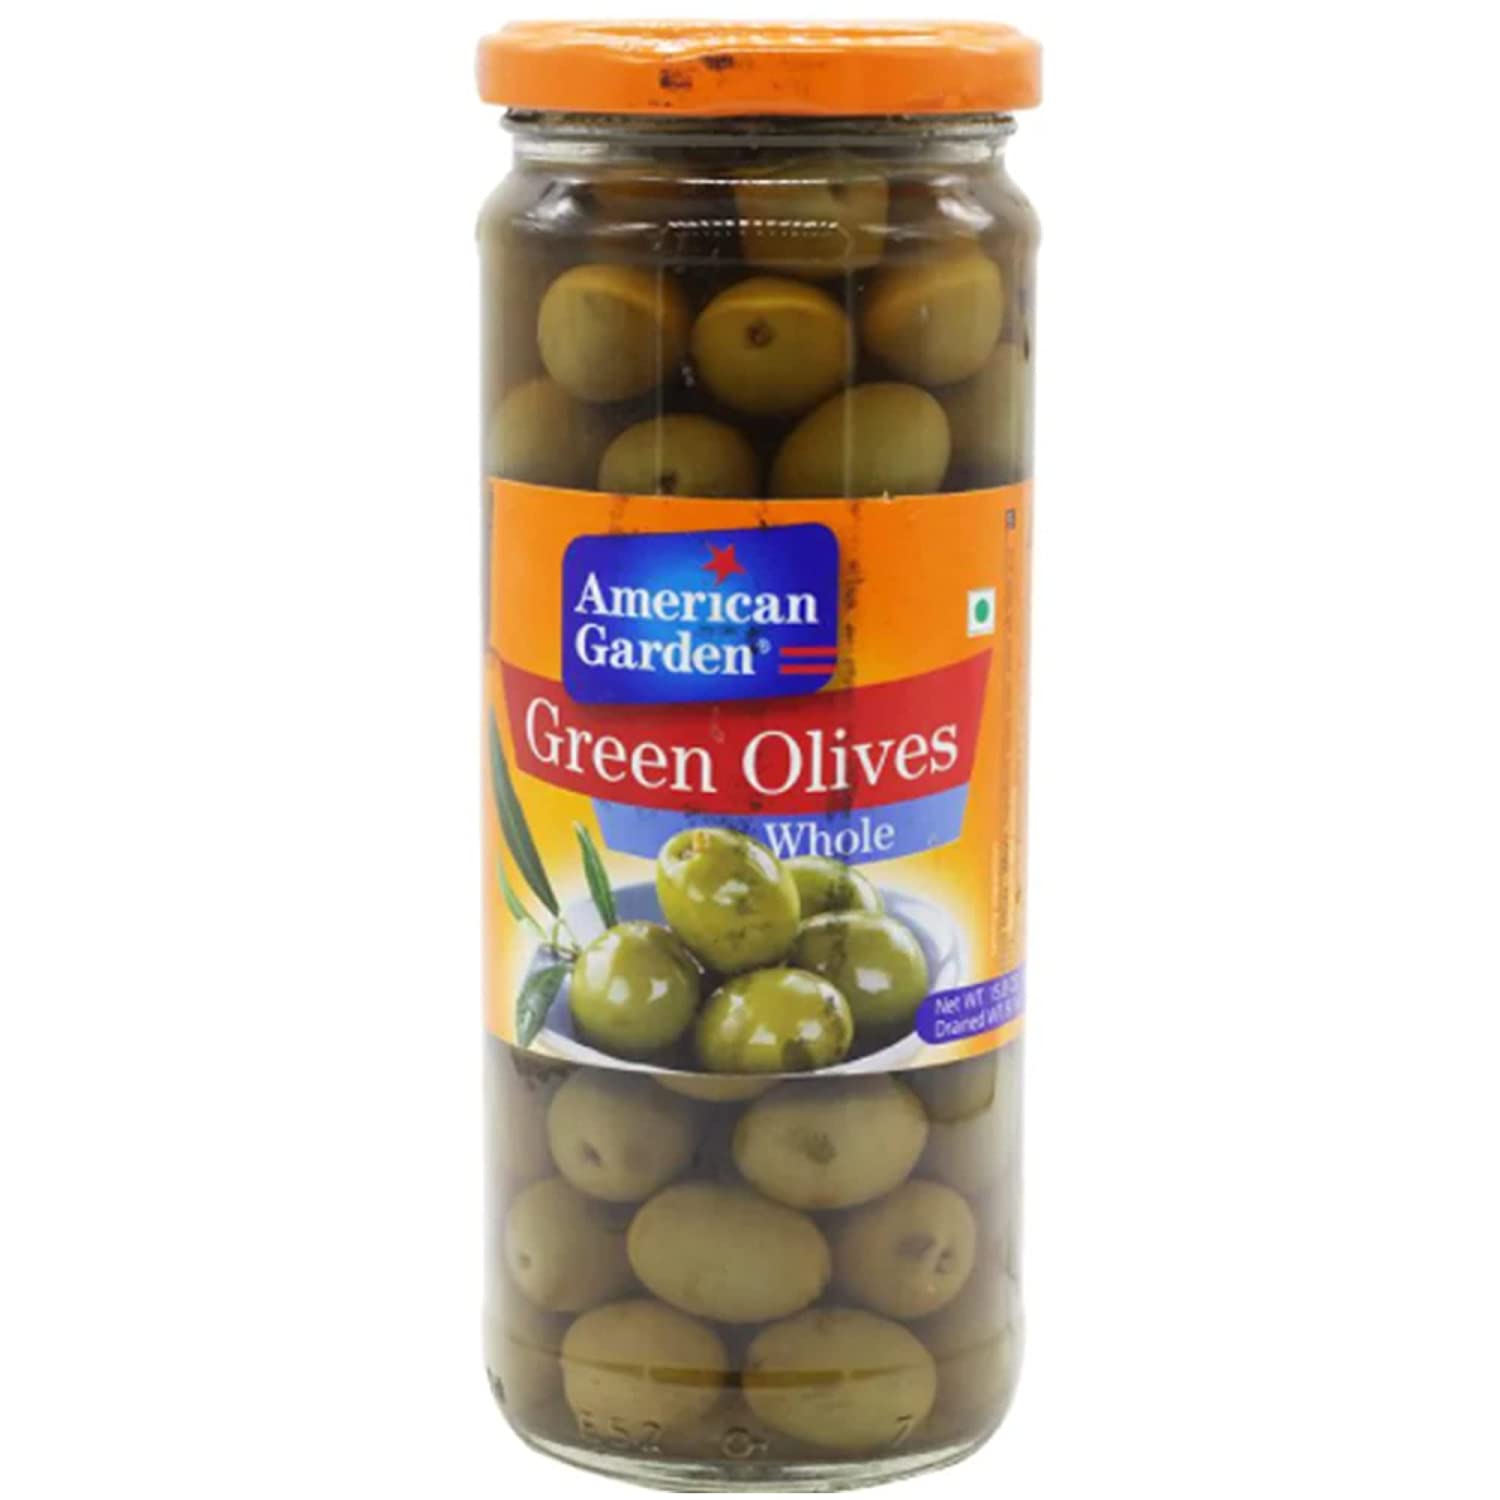 American Garden Green Olives Whole Image